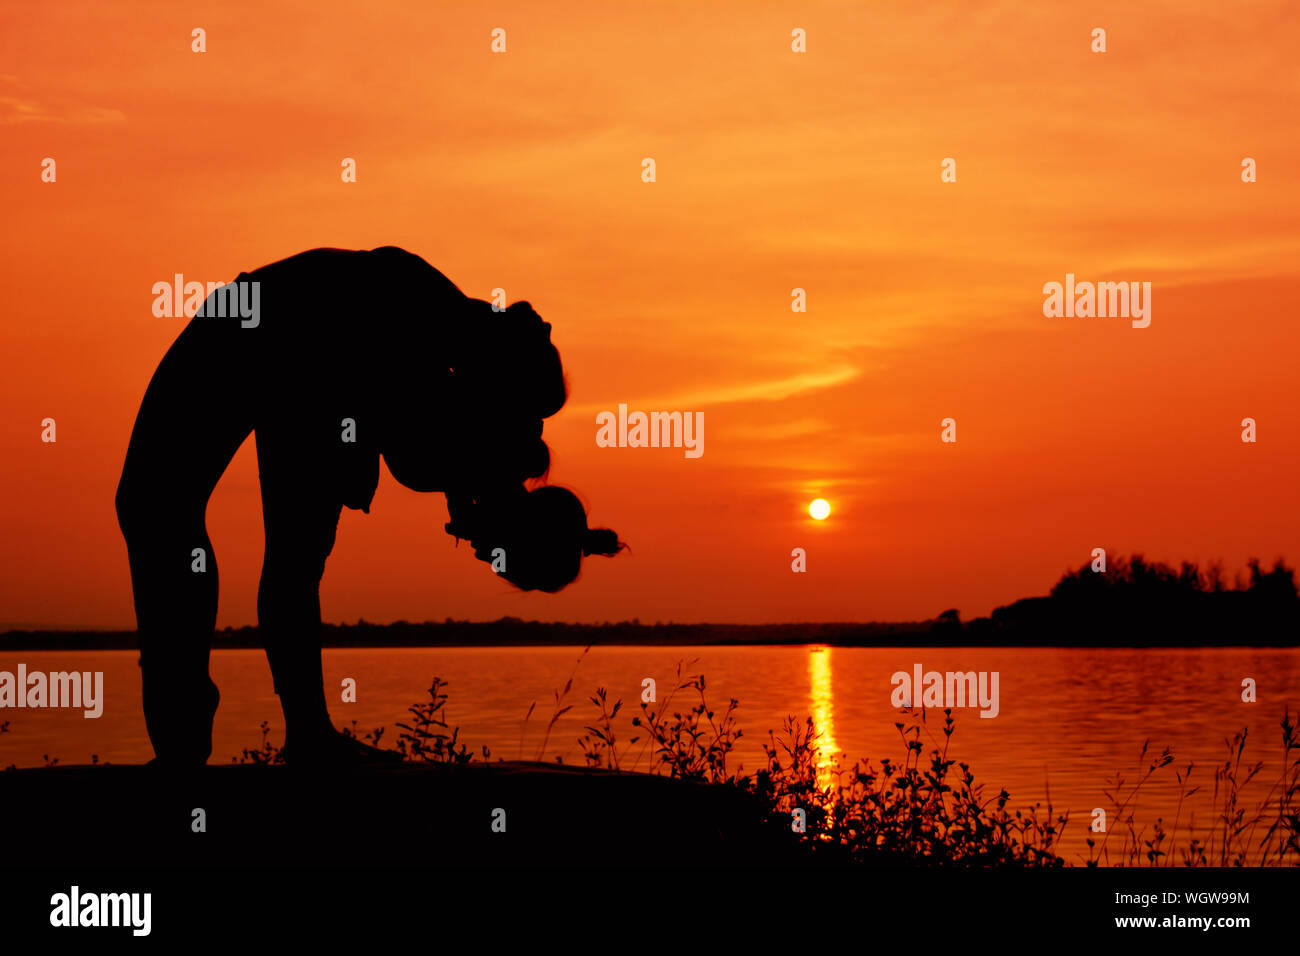 Silhouette Person Bending While Standing At Lakeshore During Sunset Stock Photo